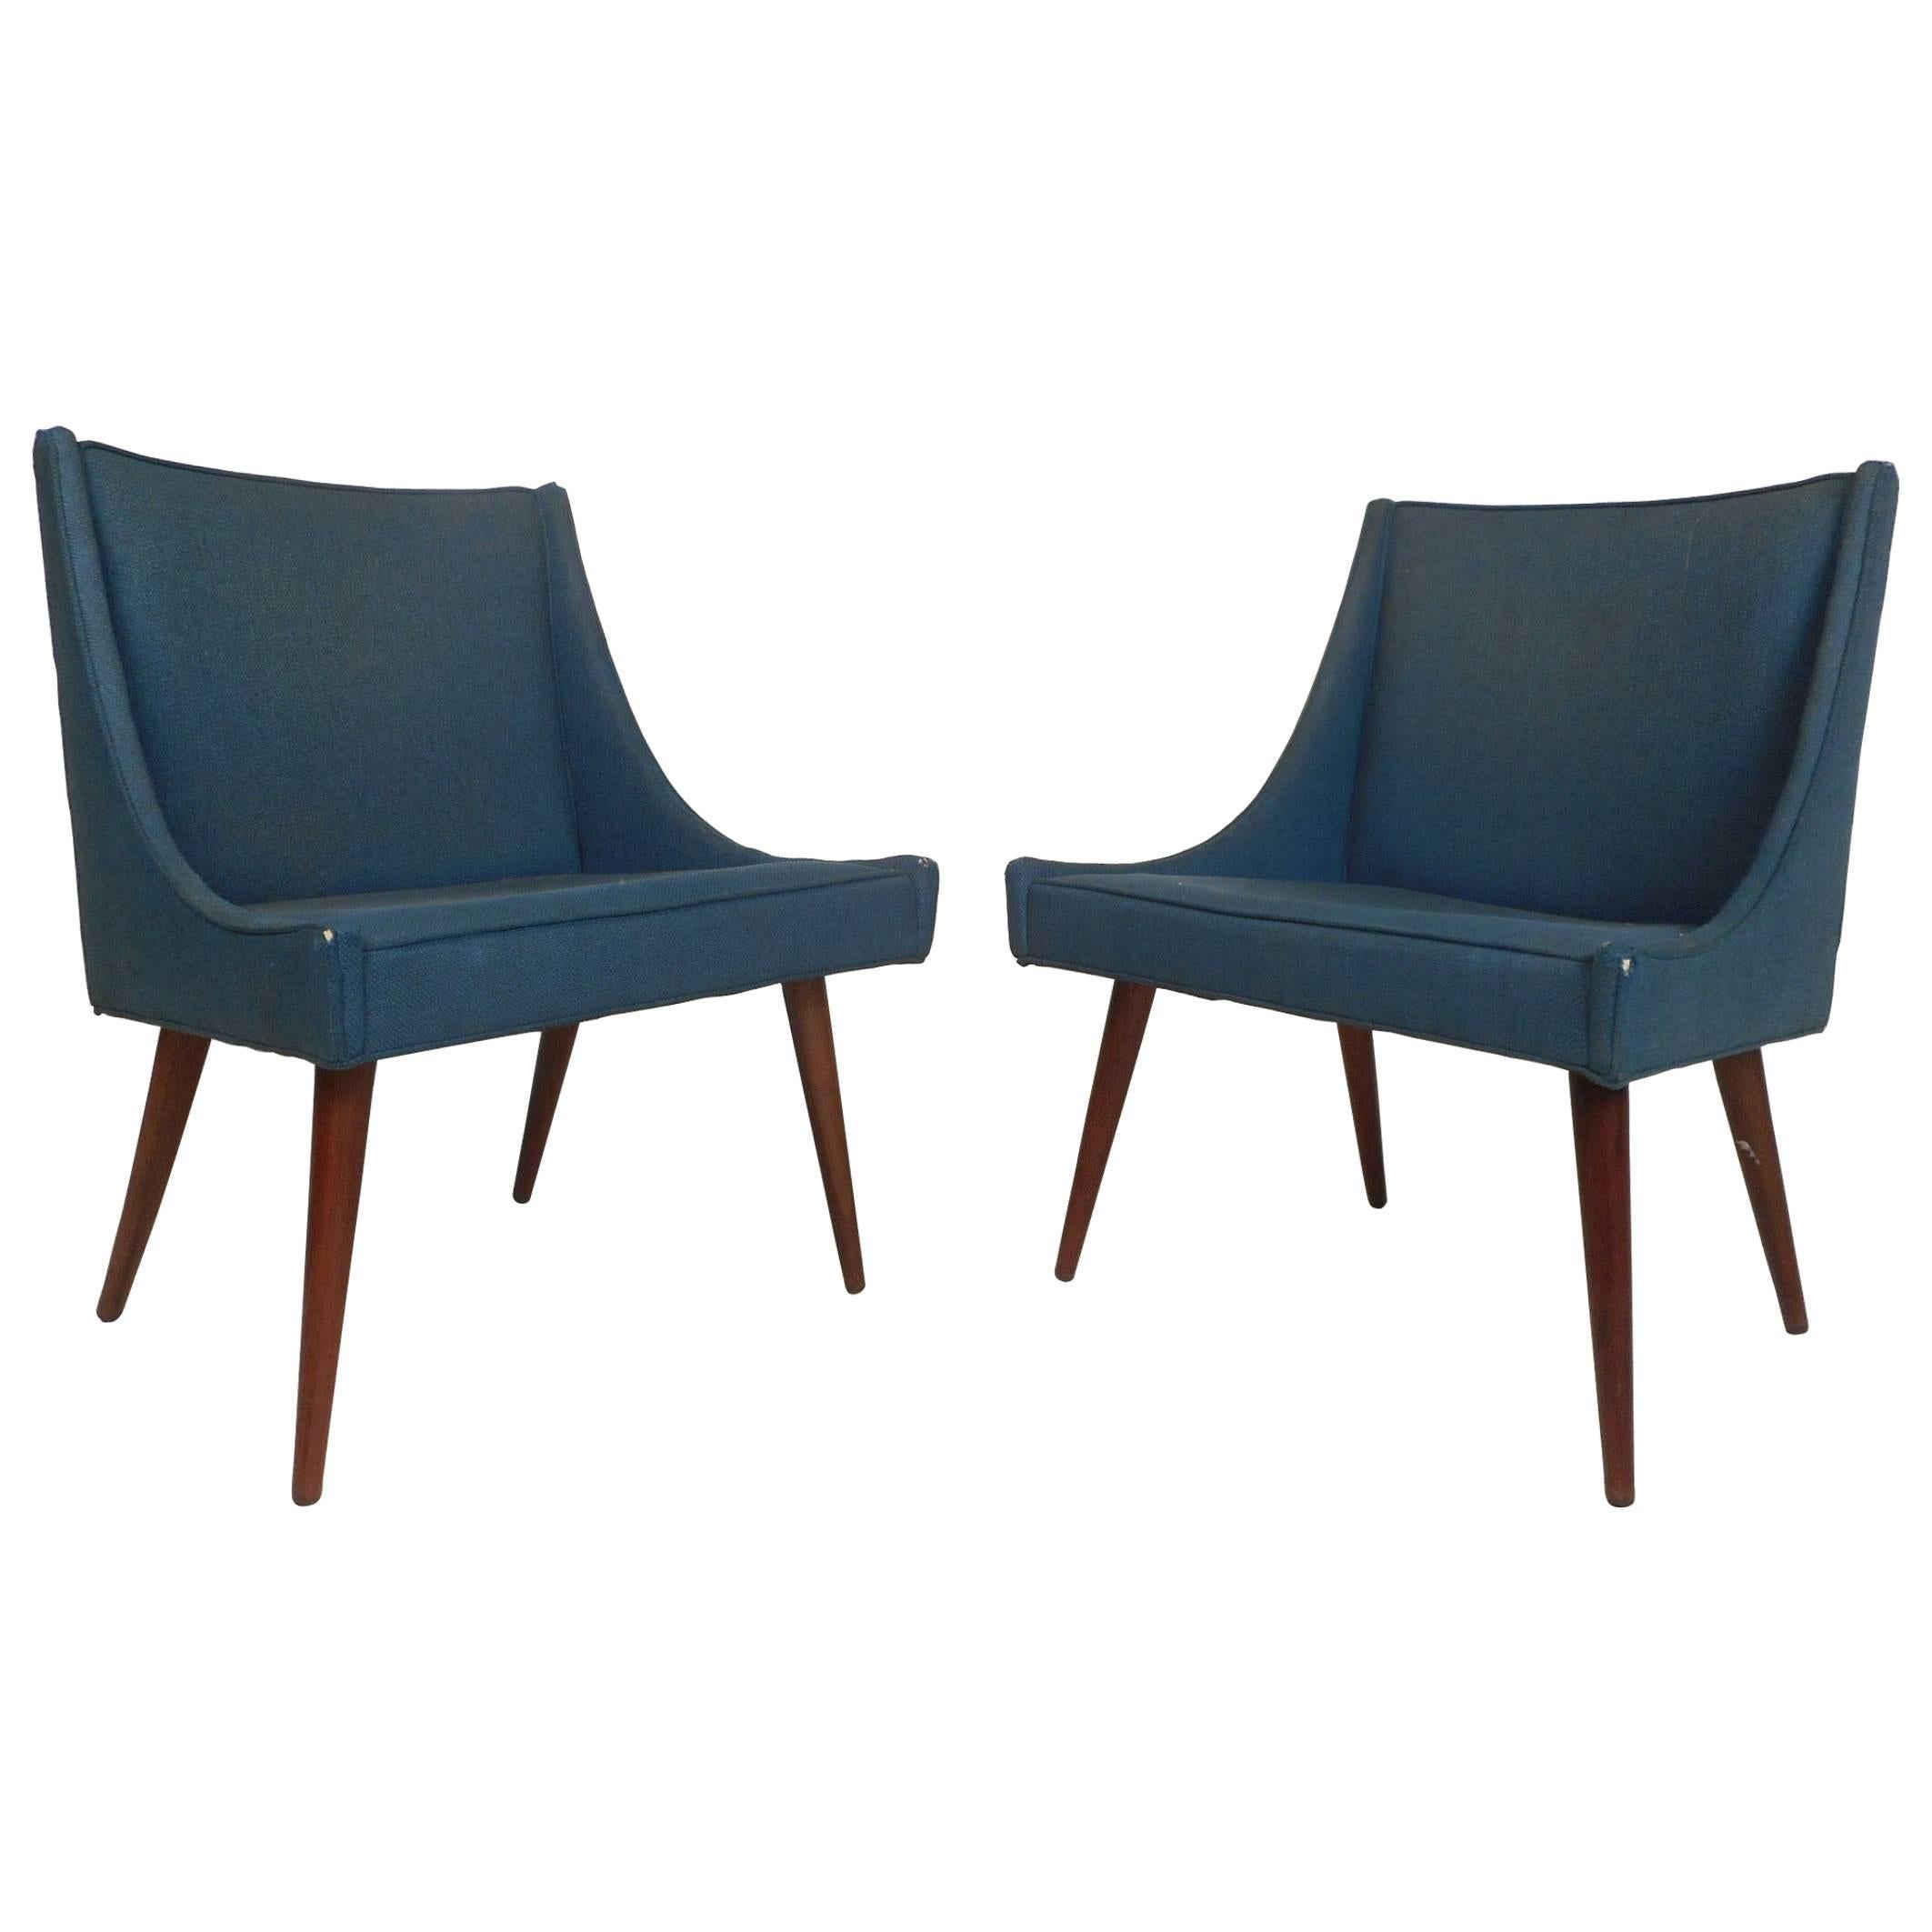 Pair of Mid-Century Modern Side Chairs by Milo Baughman for Thayer Coggin